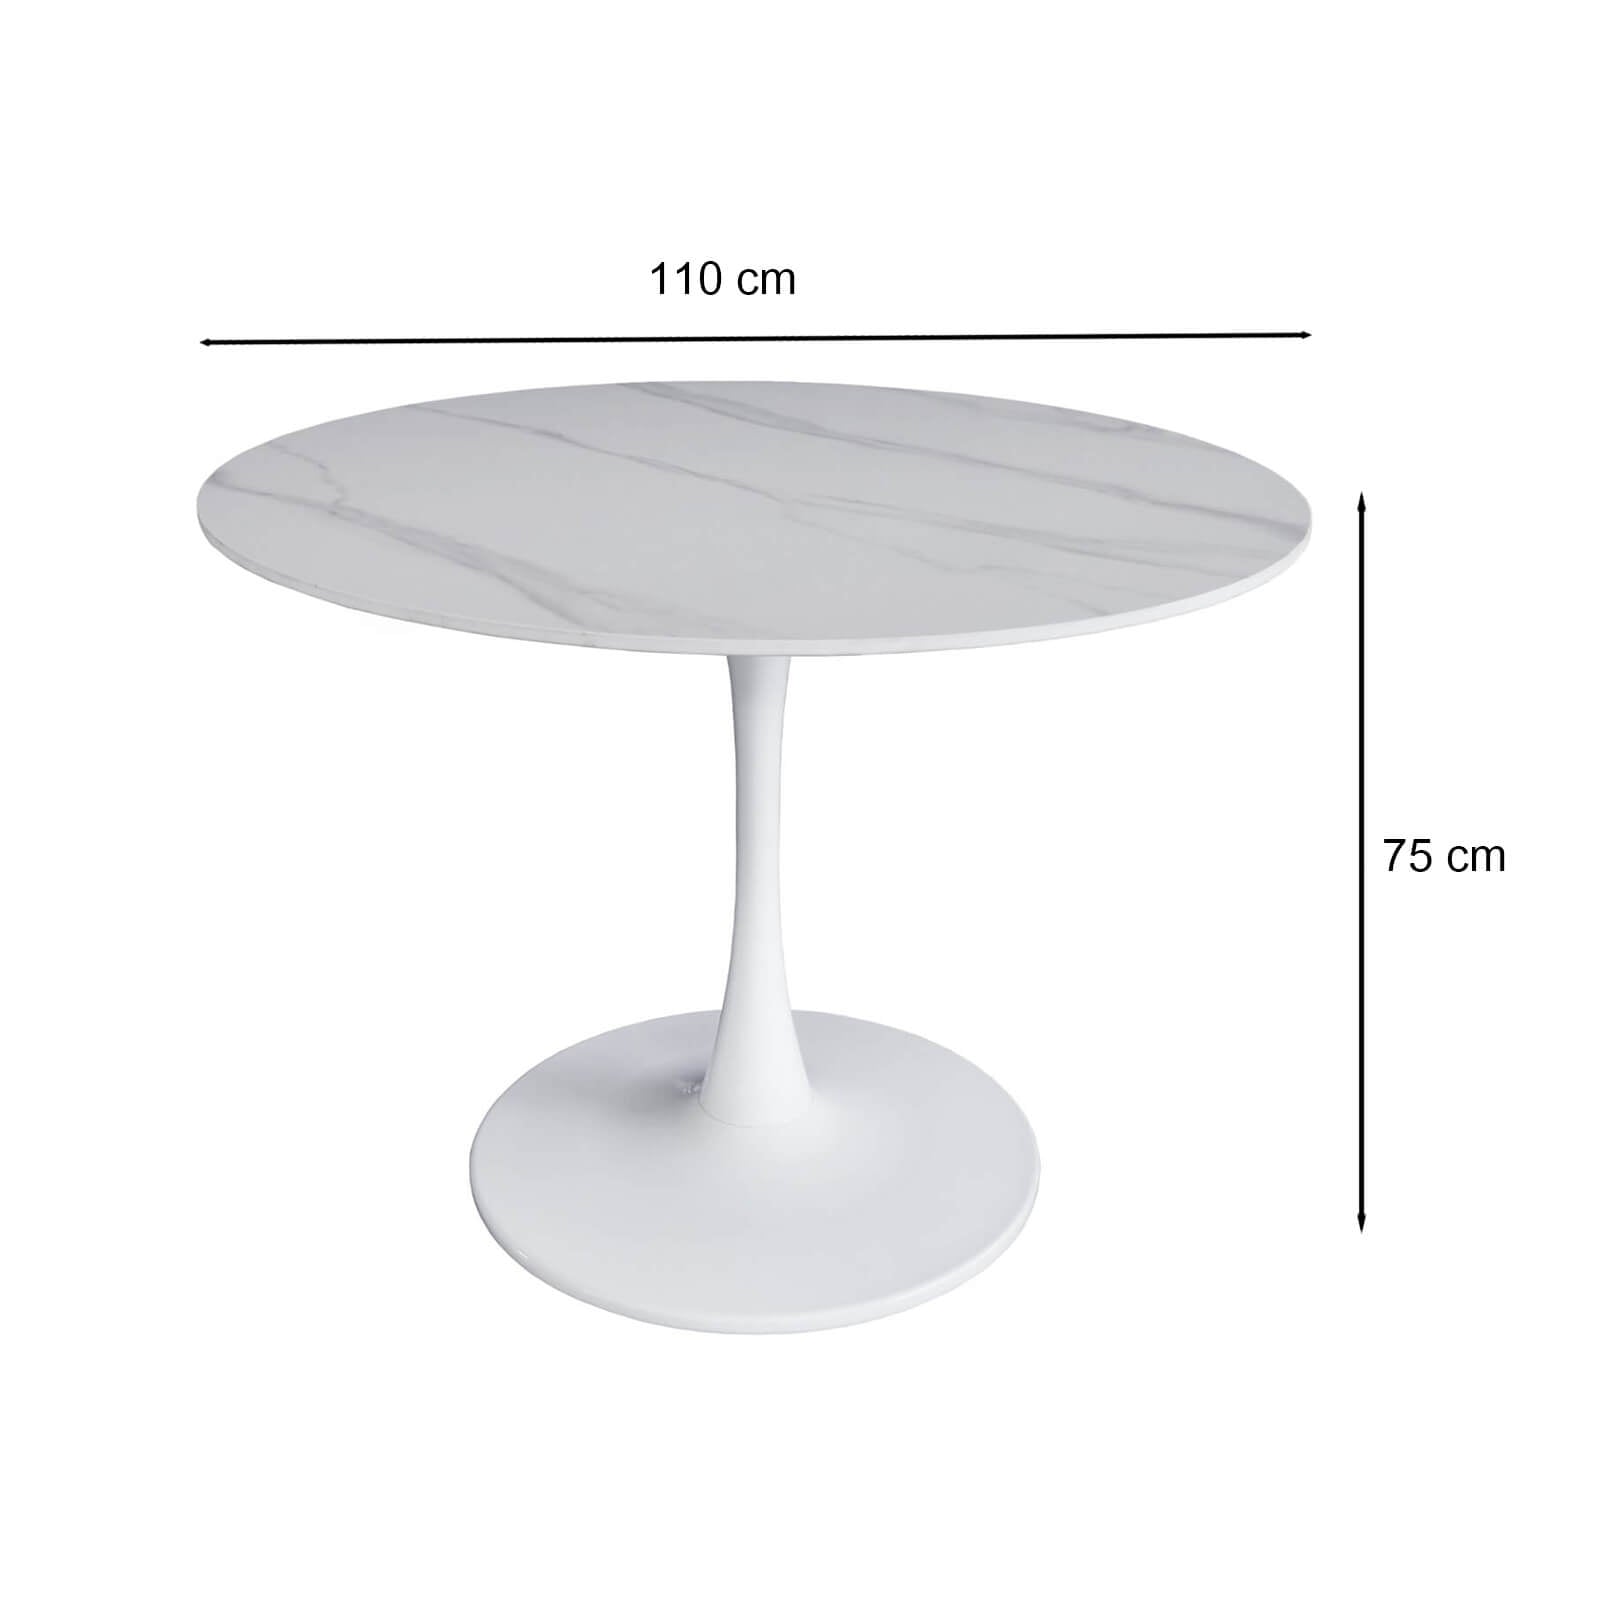 Andre | Metal Scratch Resistant Polished Ceramic 4 Seater Round Dining Table | White